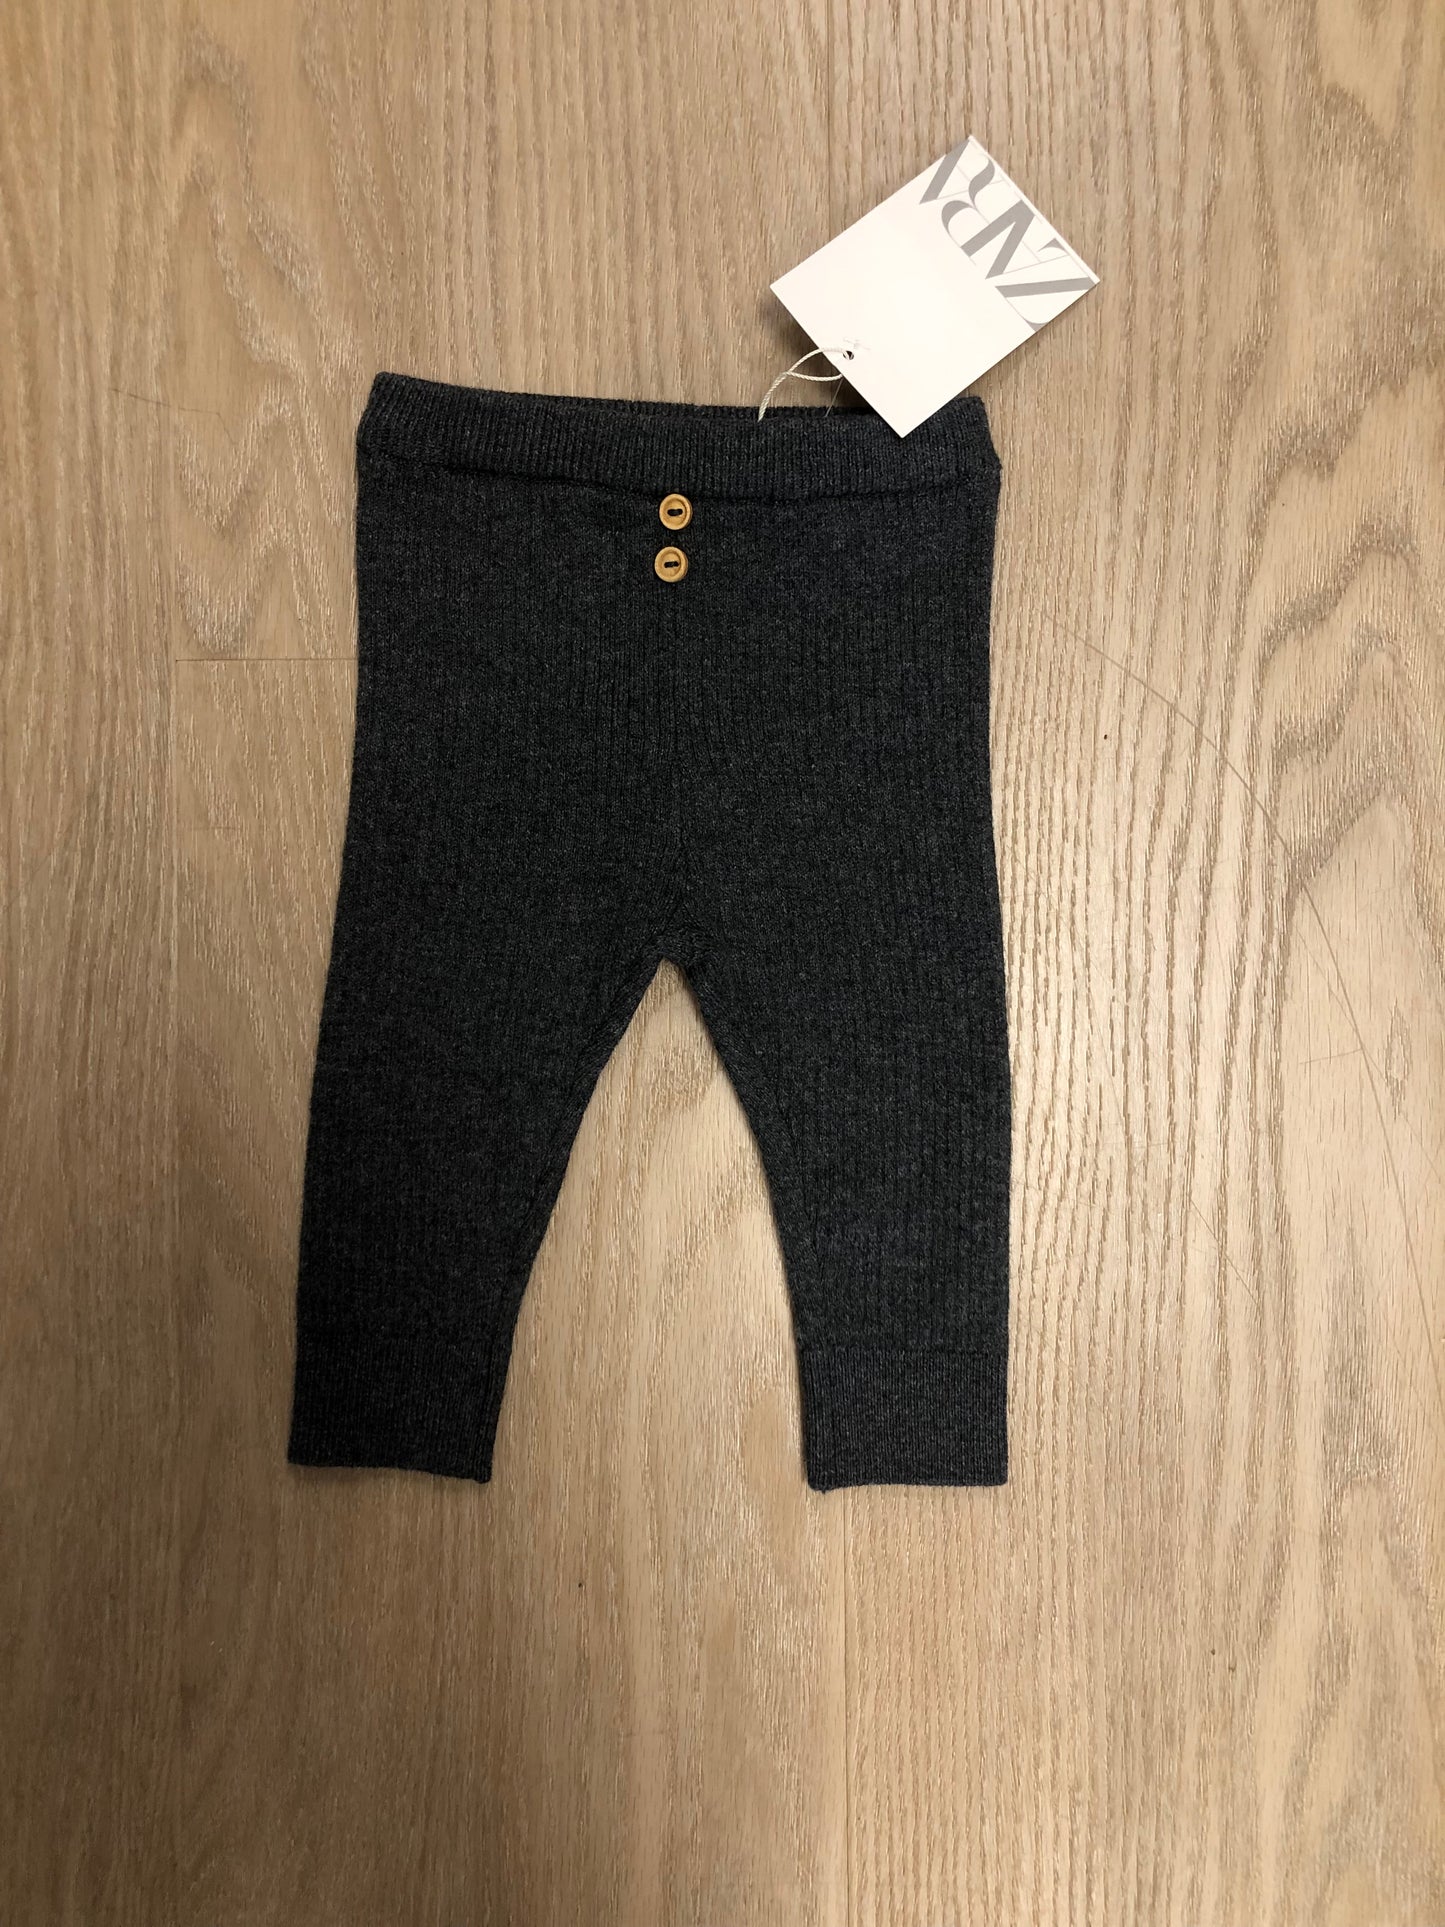 Zara Child Size 3 Months Charcoal Ribbed Pants